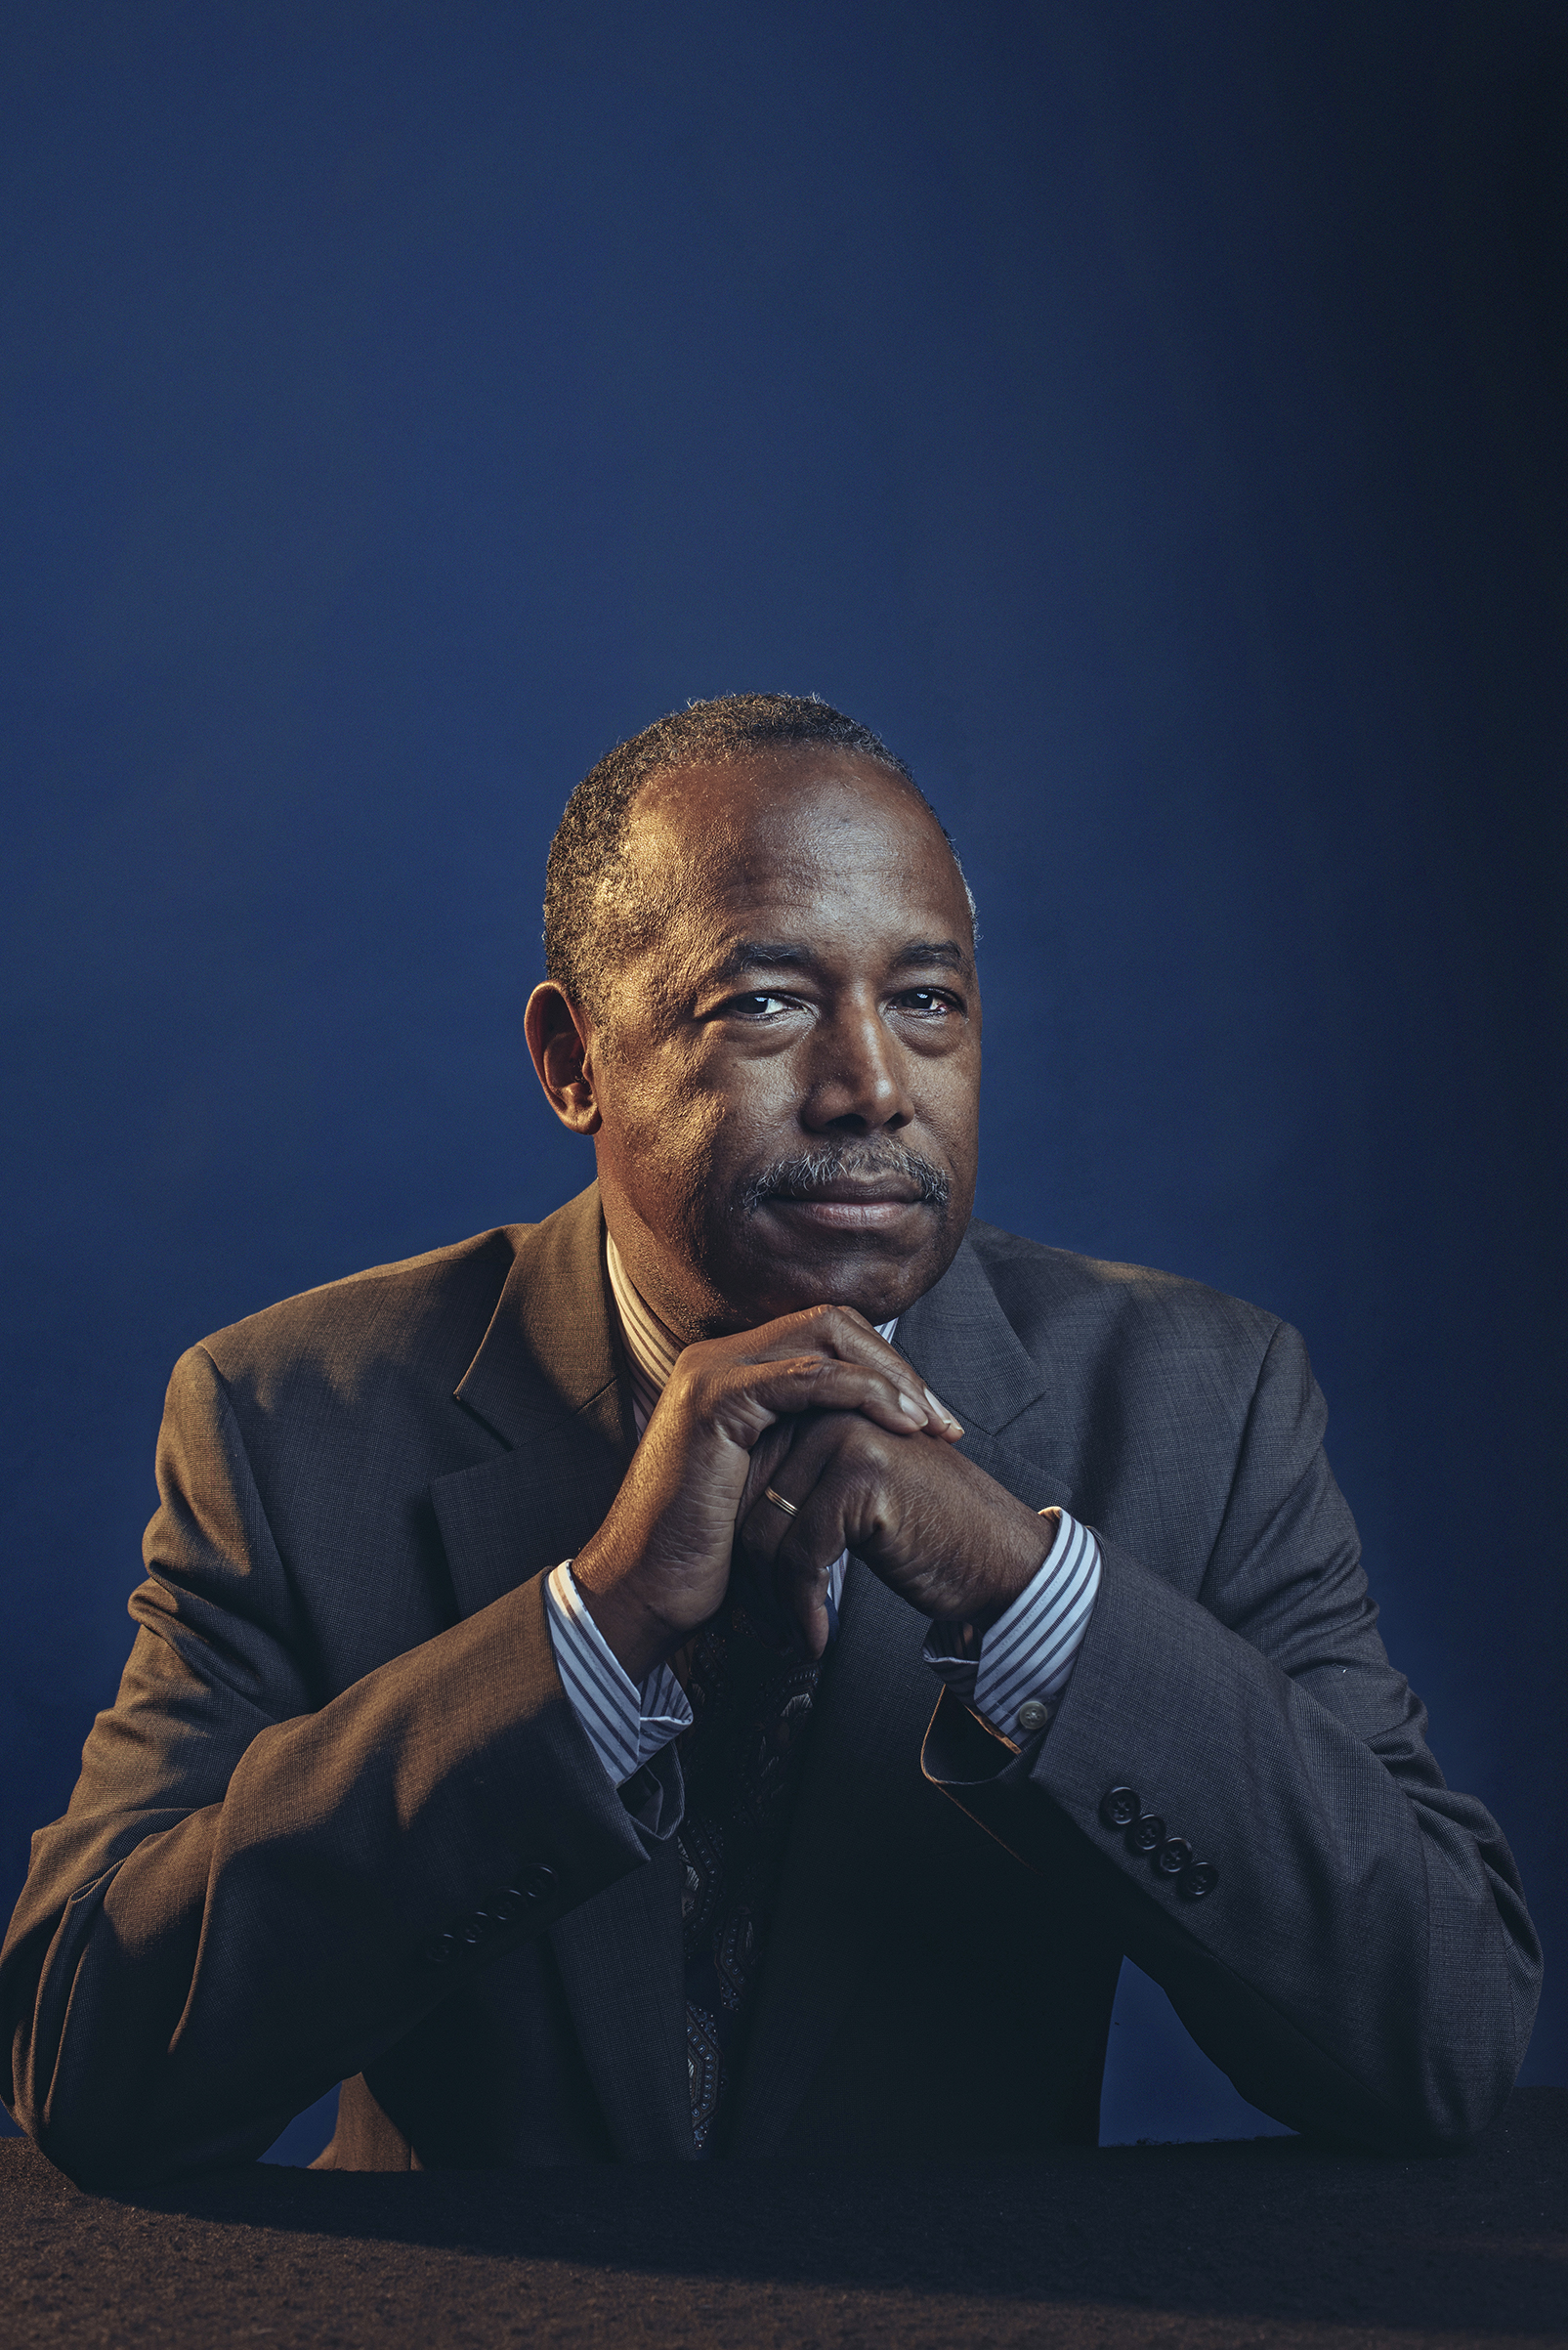 U.S. Secretary of Housing and Urban Development Ben Carson at the HUD offices in Washington, DC on July 10, 2017.